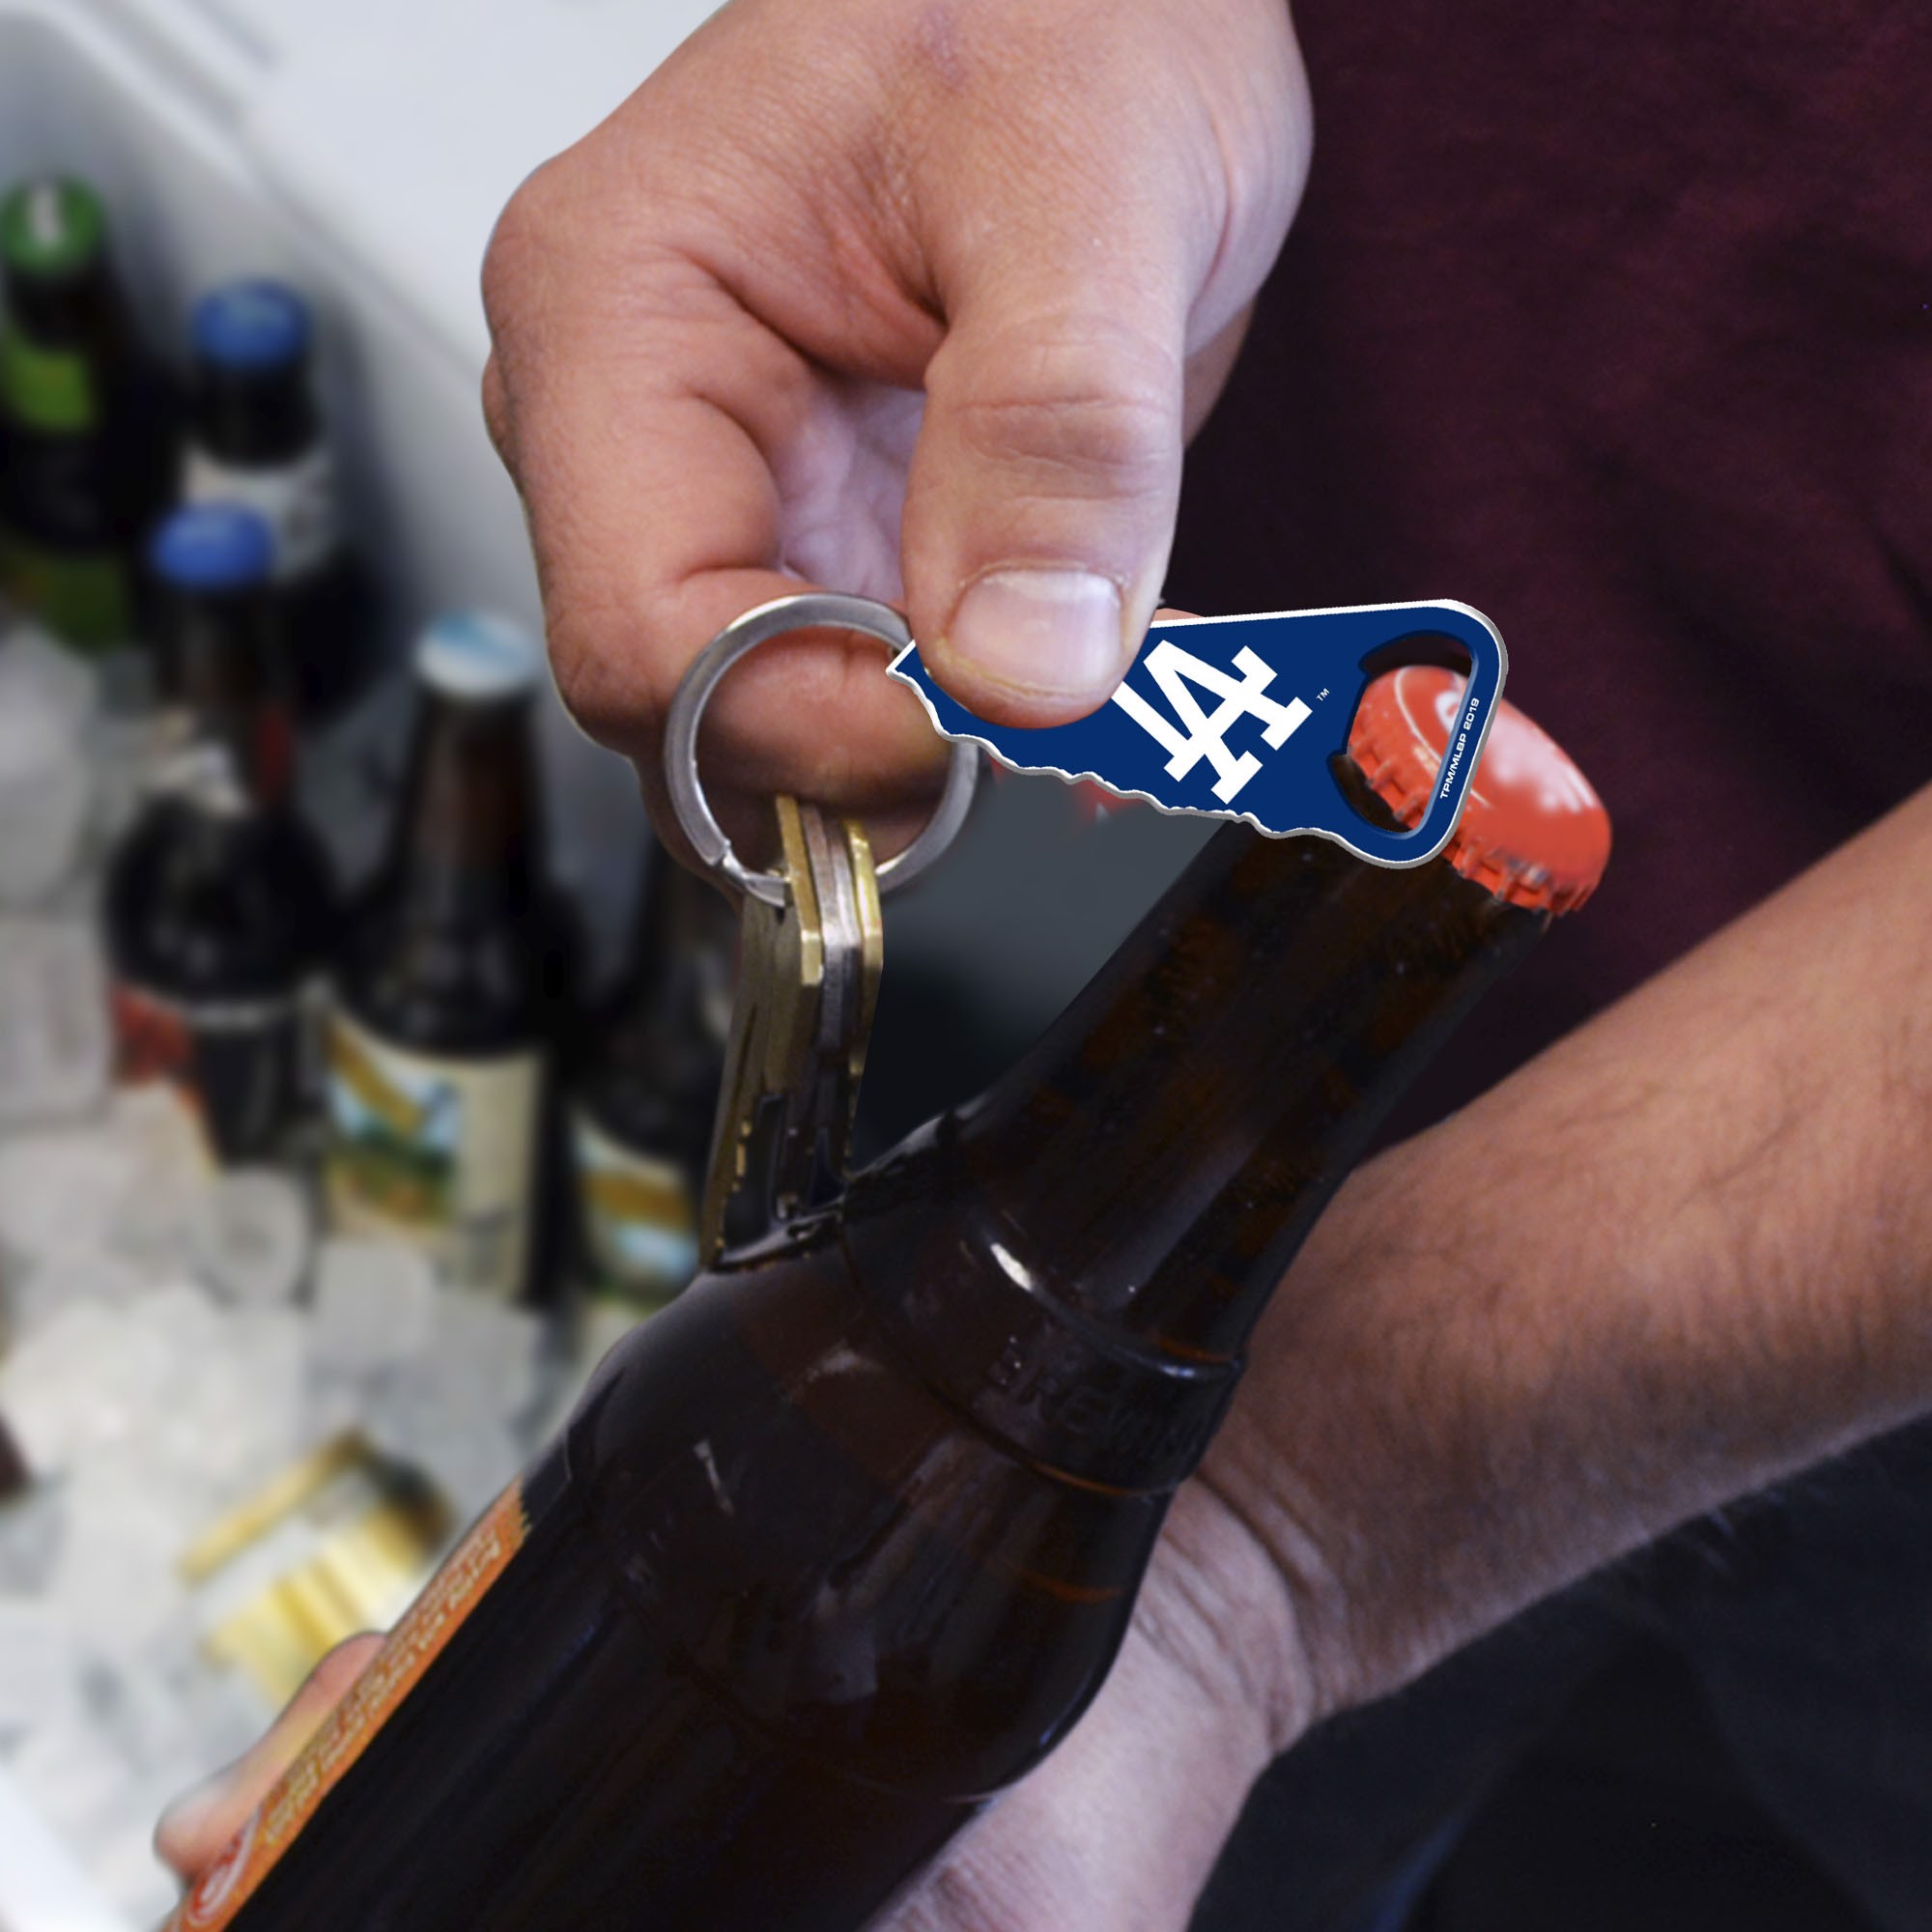 St. Louis Cardinals Bottle Opener Key Chain Officially MLB Licensed